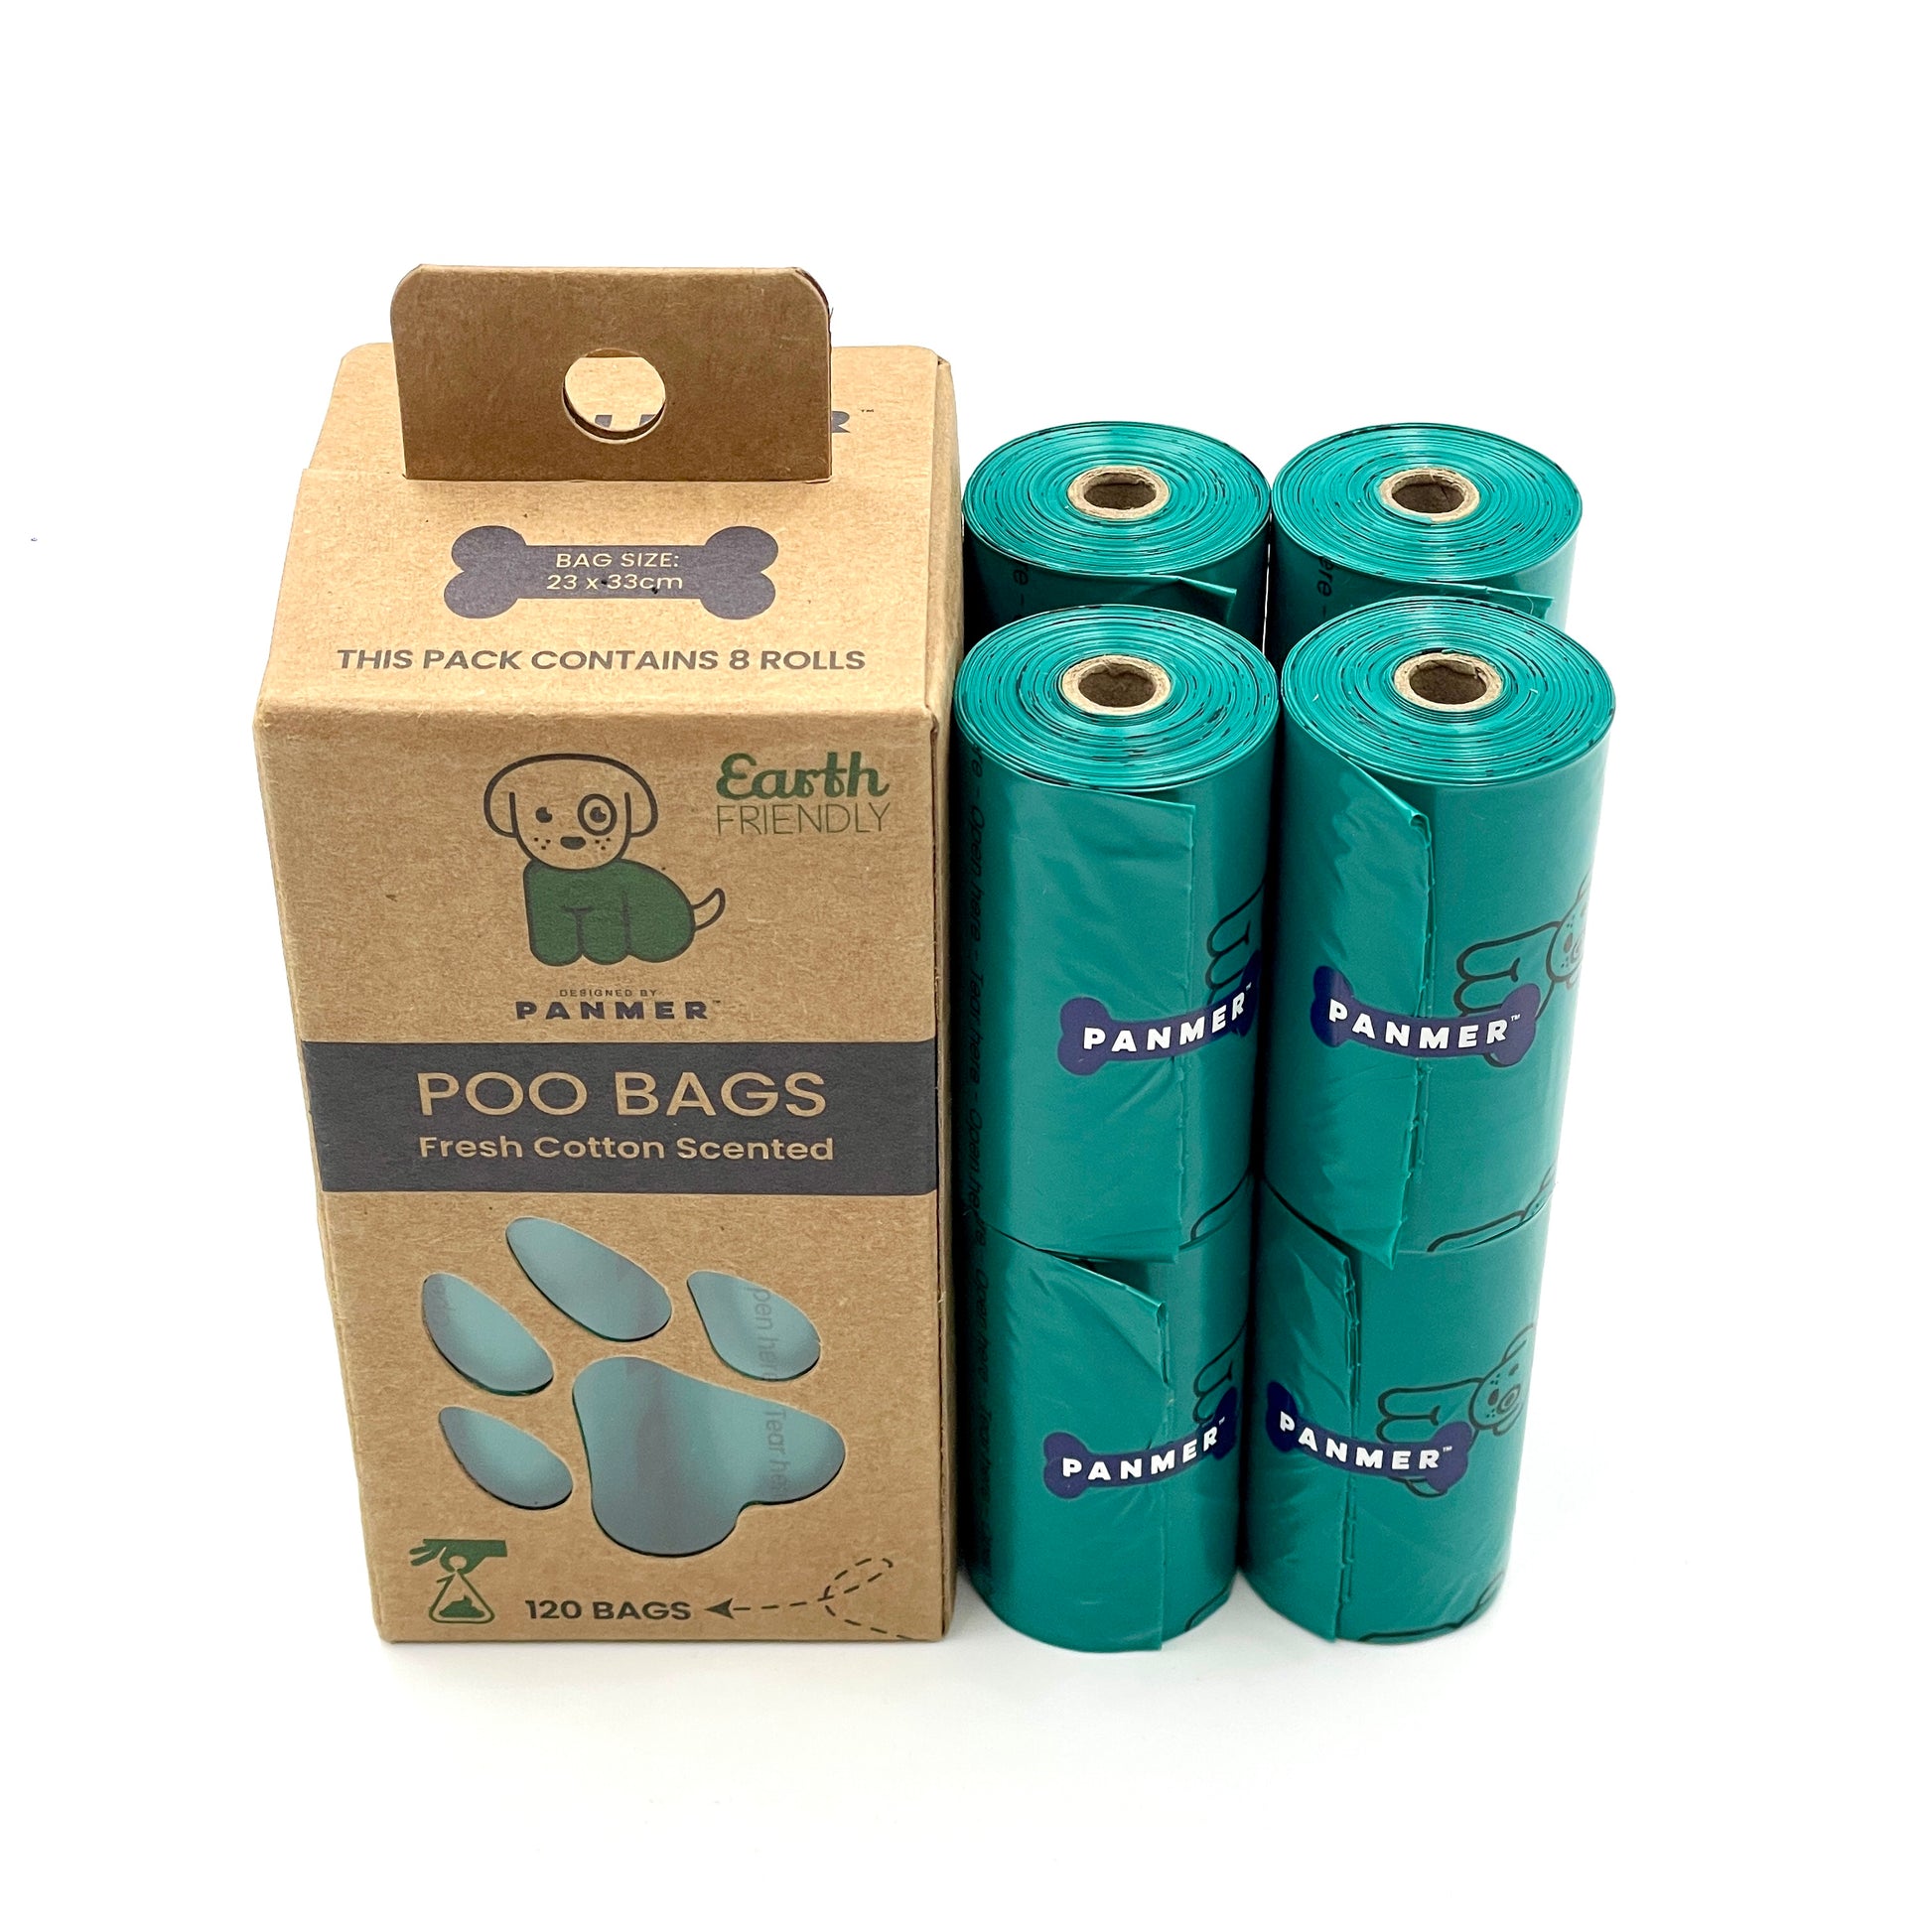 PCR Dog Poo Bags Coming Soon! Better Earth Friendly Solution - Pet Wipes & Poo Bags